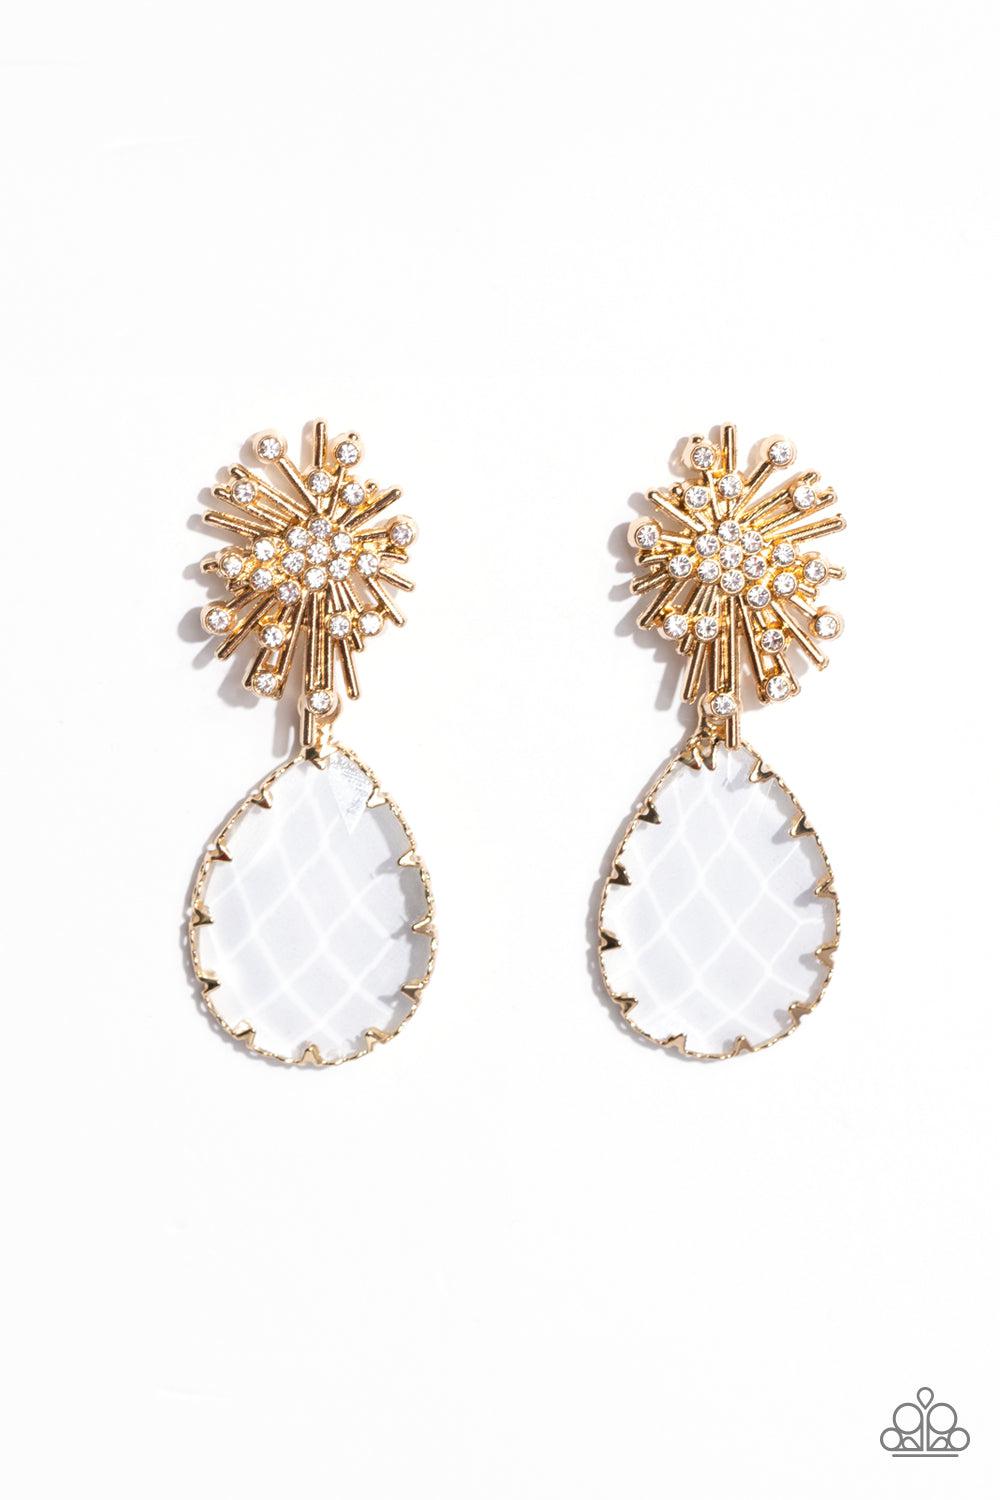 Stellar Shooting Star Gold & White Gem Earrings - Paparazzi Accessories- lightbox - CarasShop.com - $5 Jewelry by Cara Jewels